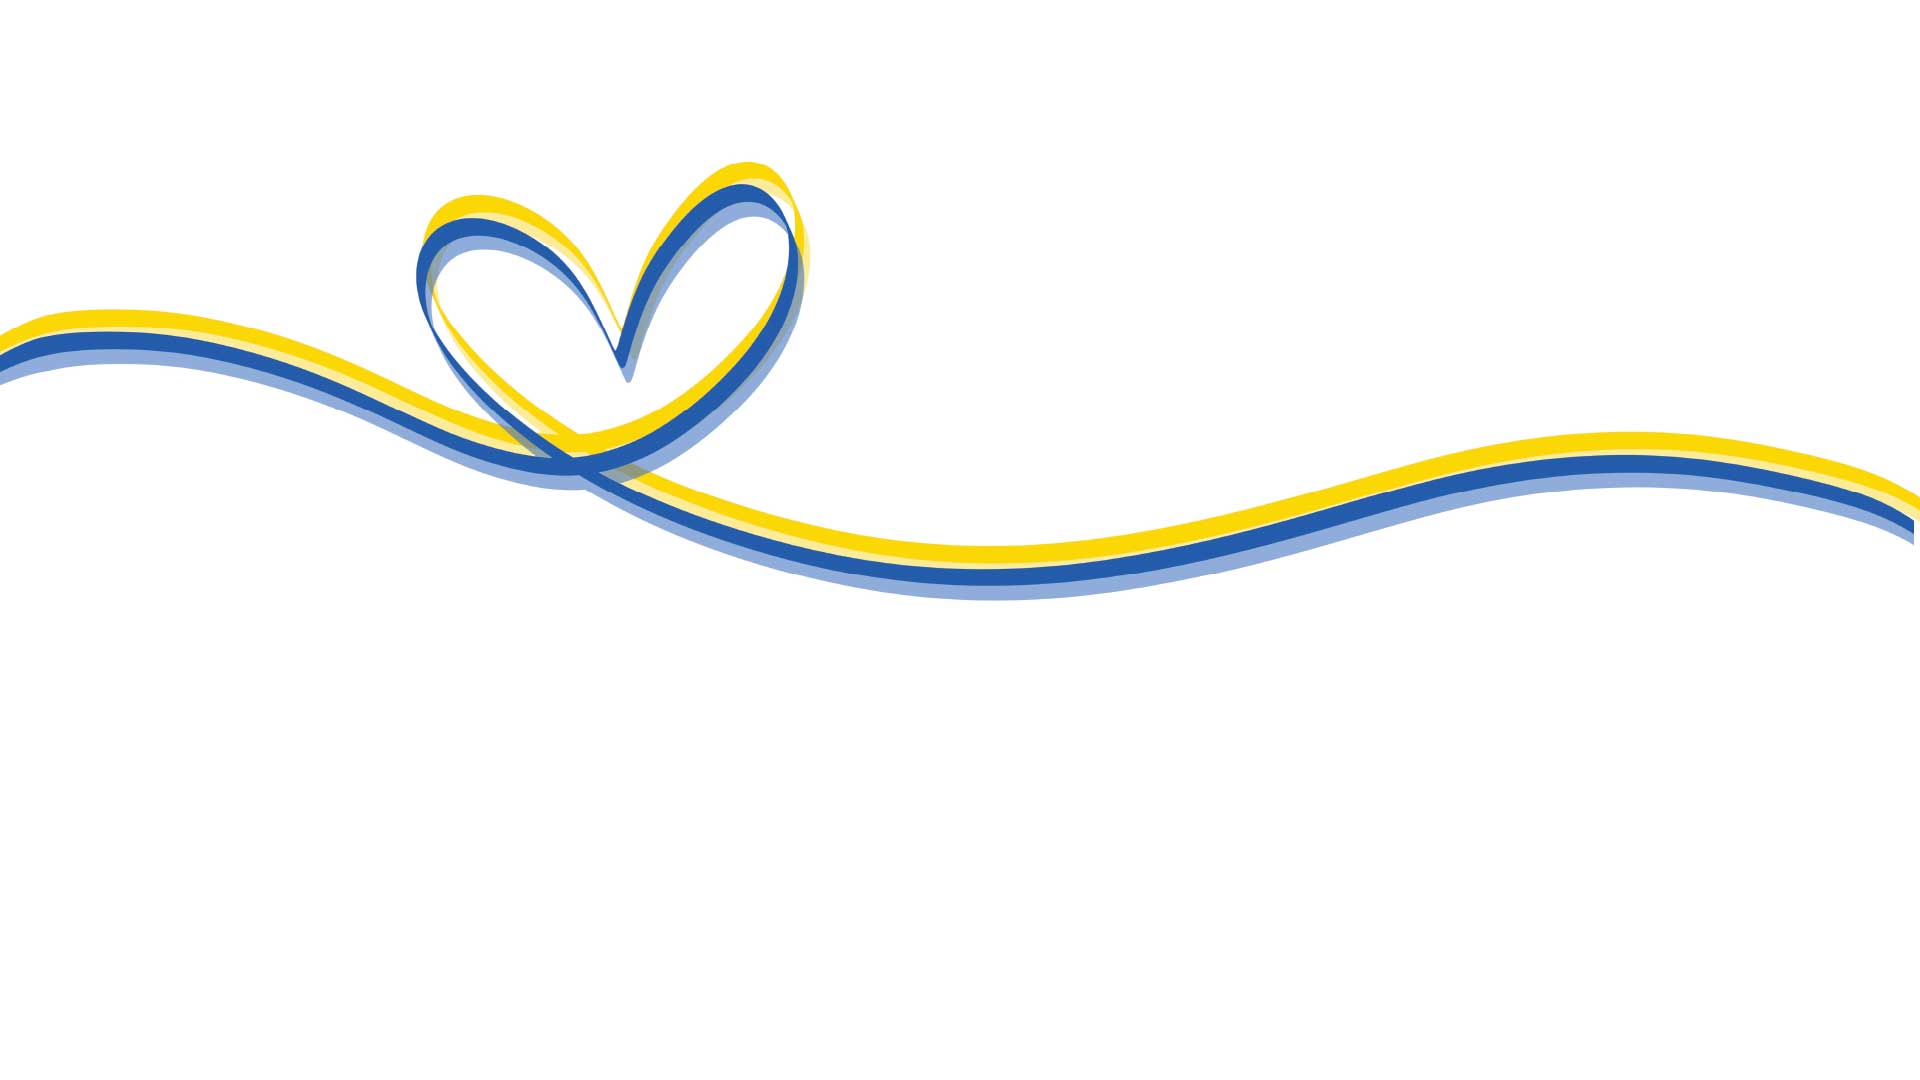 Ukraine flag icon in the shape of a heart